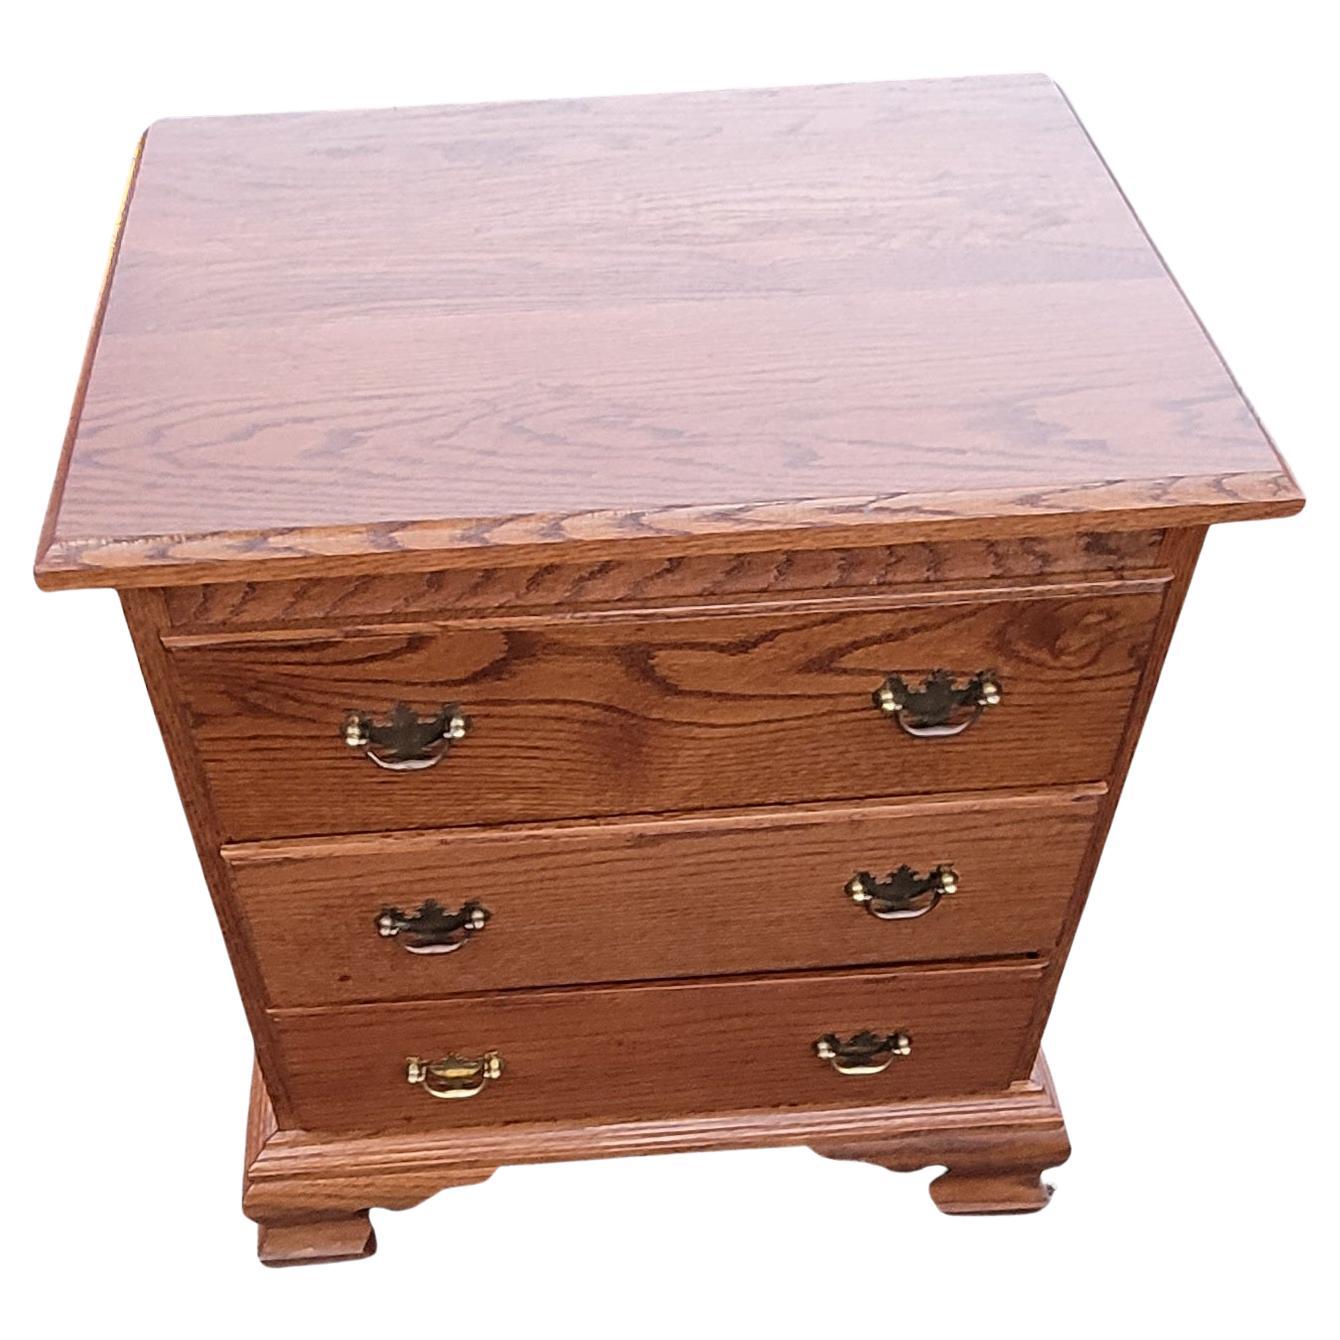 Mid-century Pennsylvania house oak bedside chest of drawers nightstand featuring three drawers with dovetailed construction in great working condition. Measures 21.75